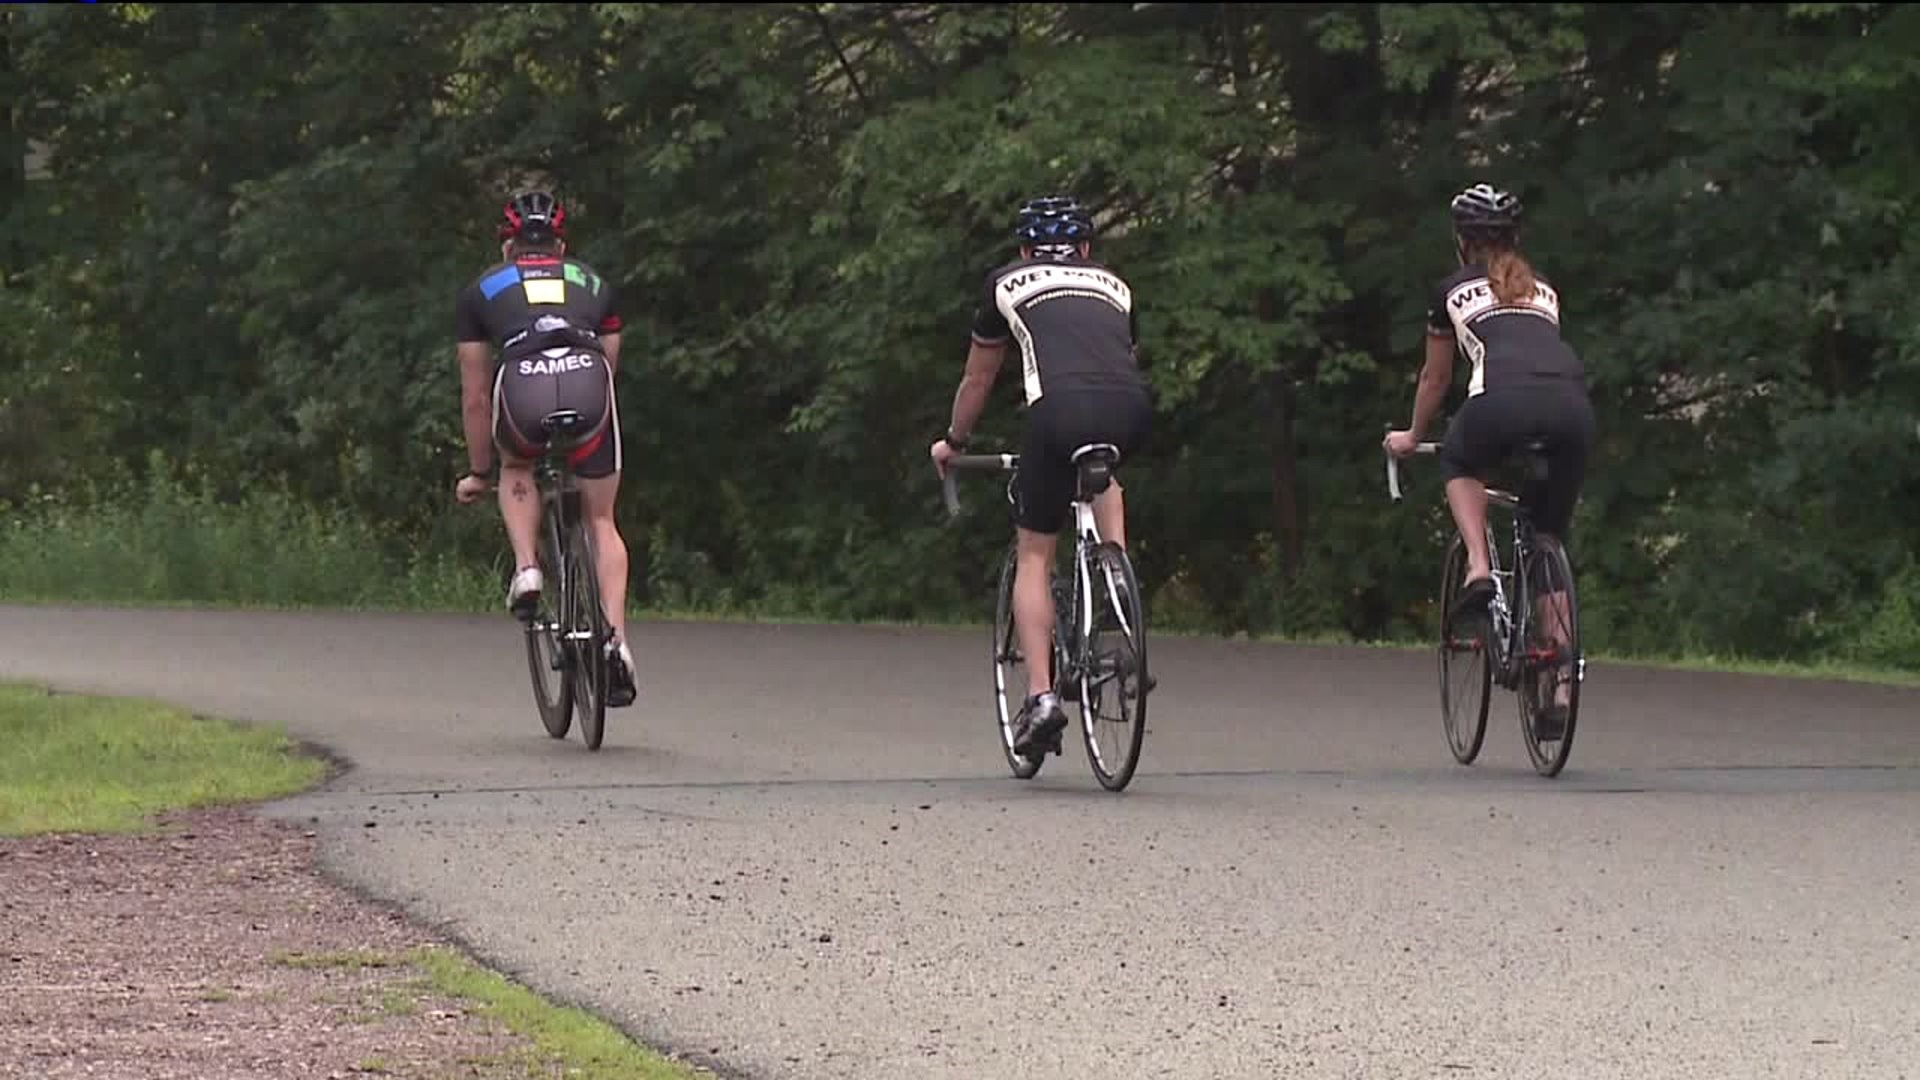 Project Hopes to Make City Streets Safer for Bicyclists, Runners